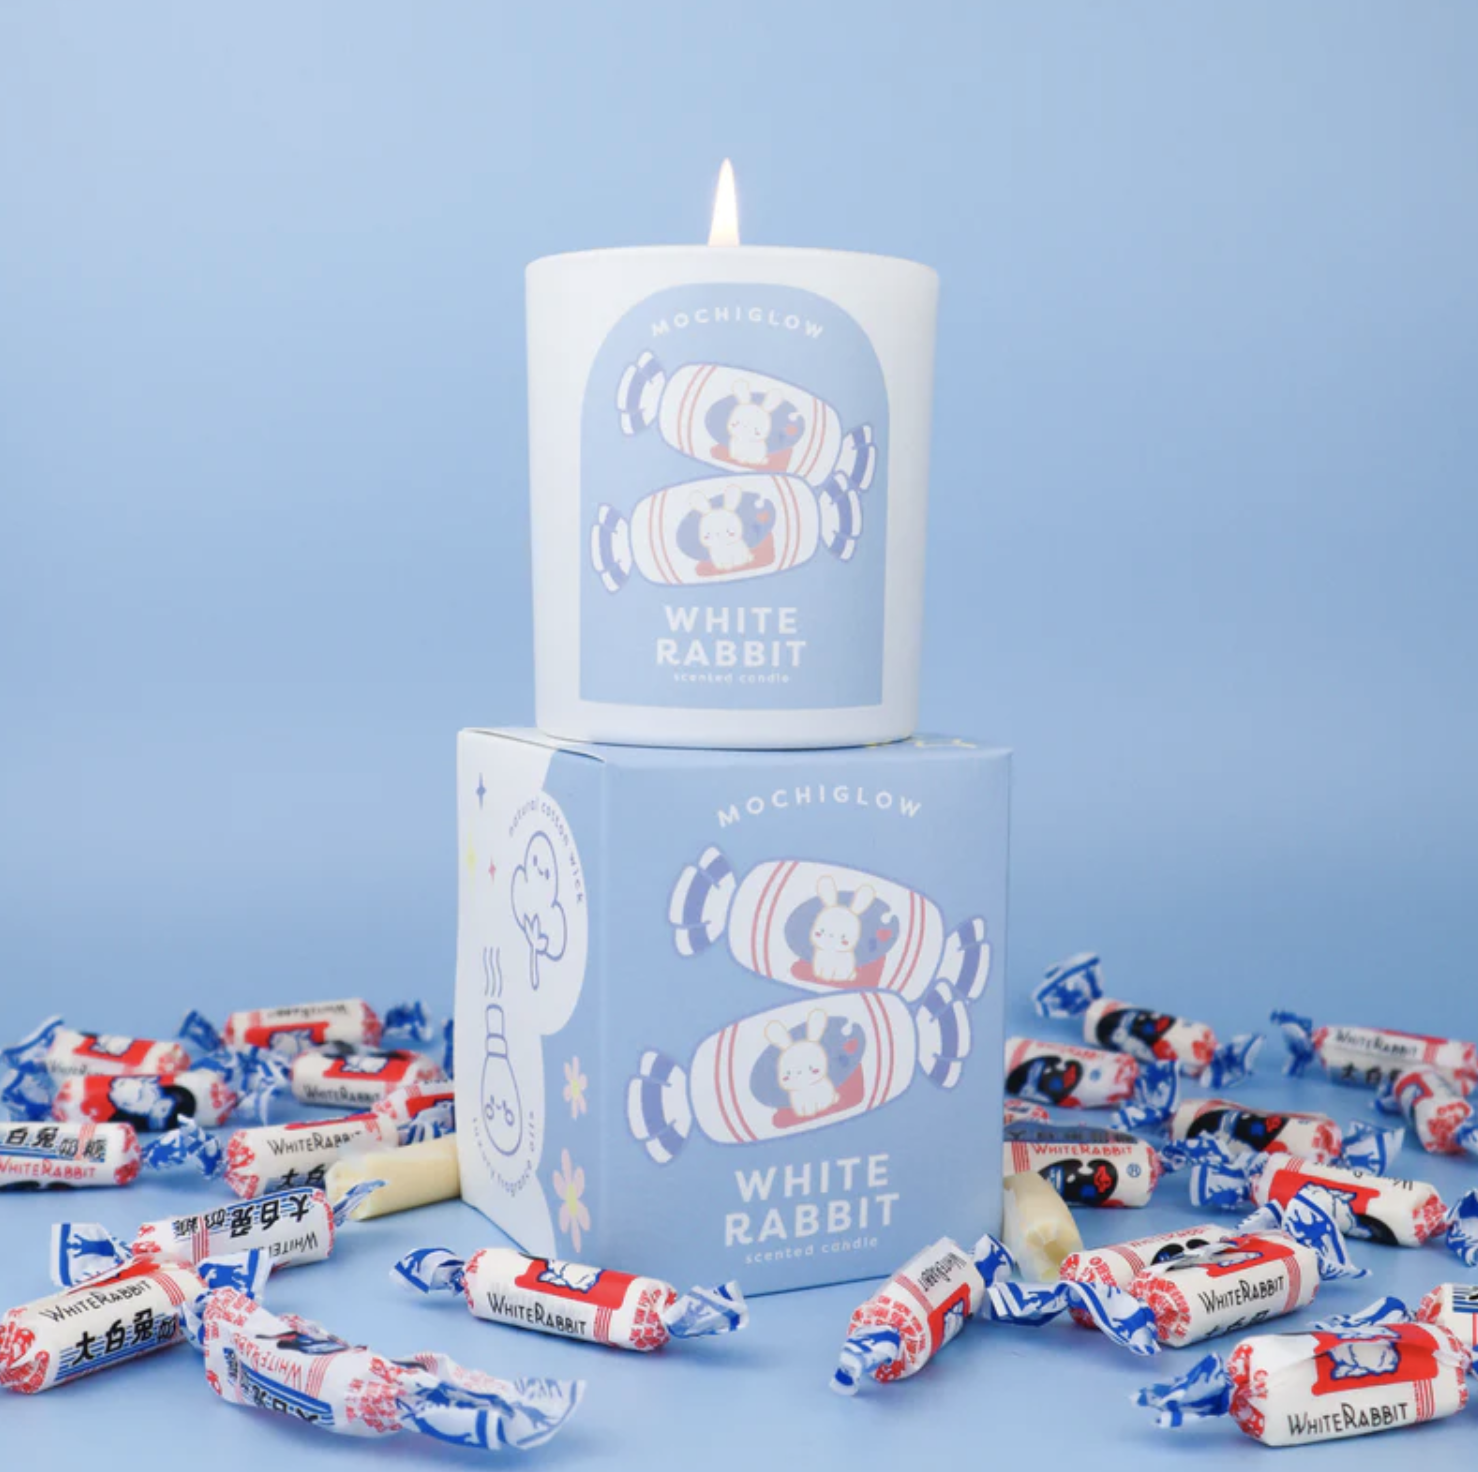 White Rabbit Candy-themed scented candle on top of corresponding box surrounded by White Rabbit Candies